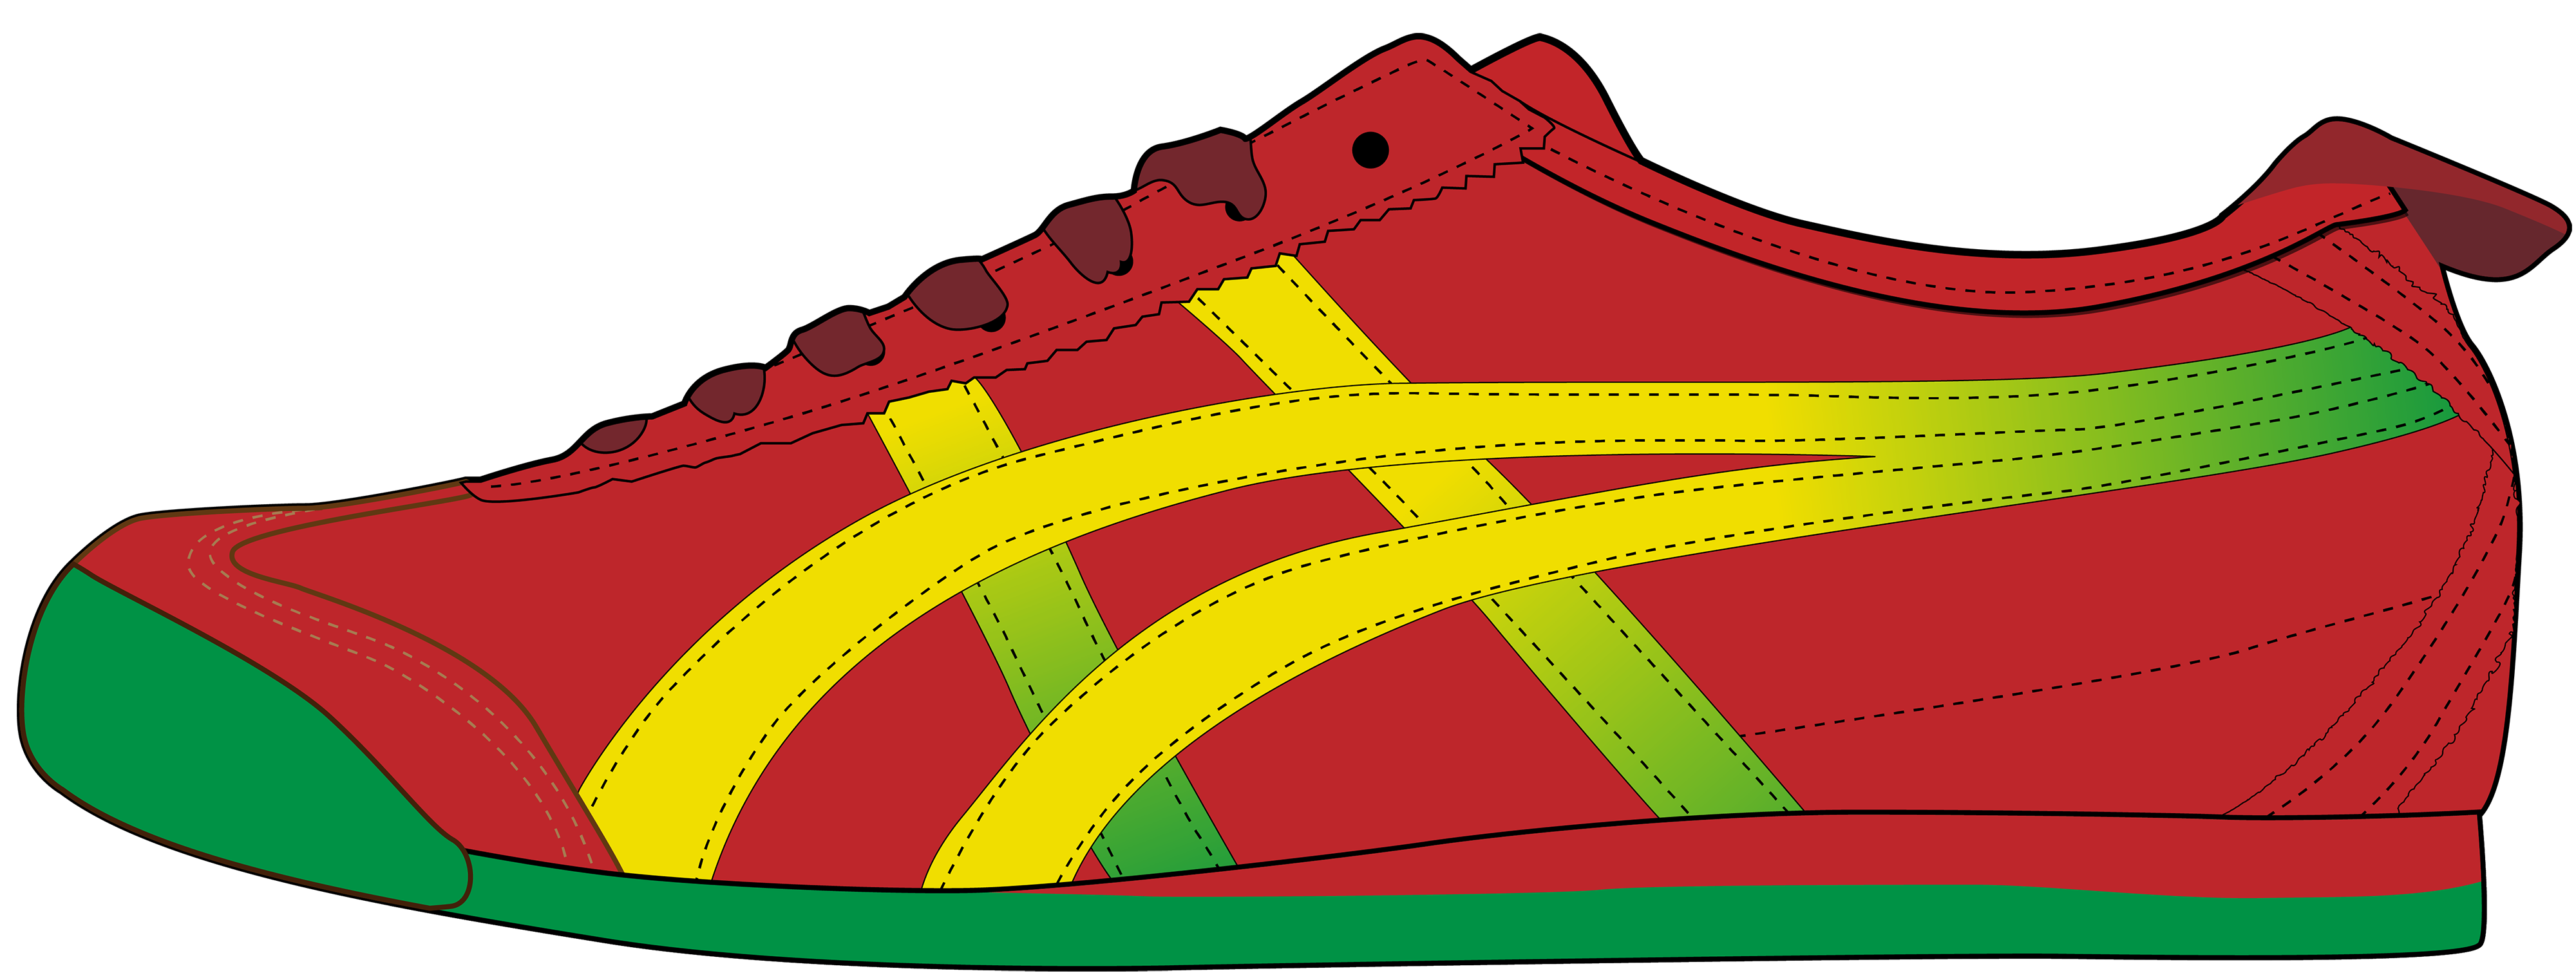 Red men sport shoe. Track clipart track cleat